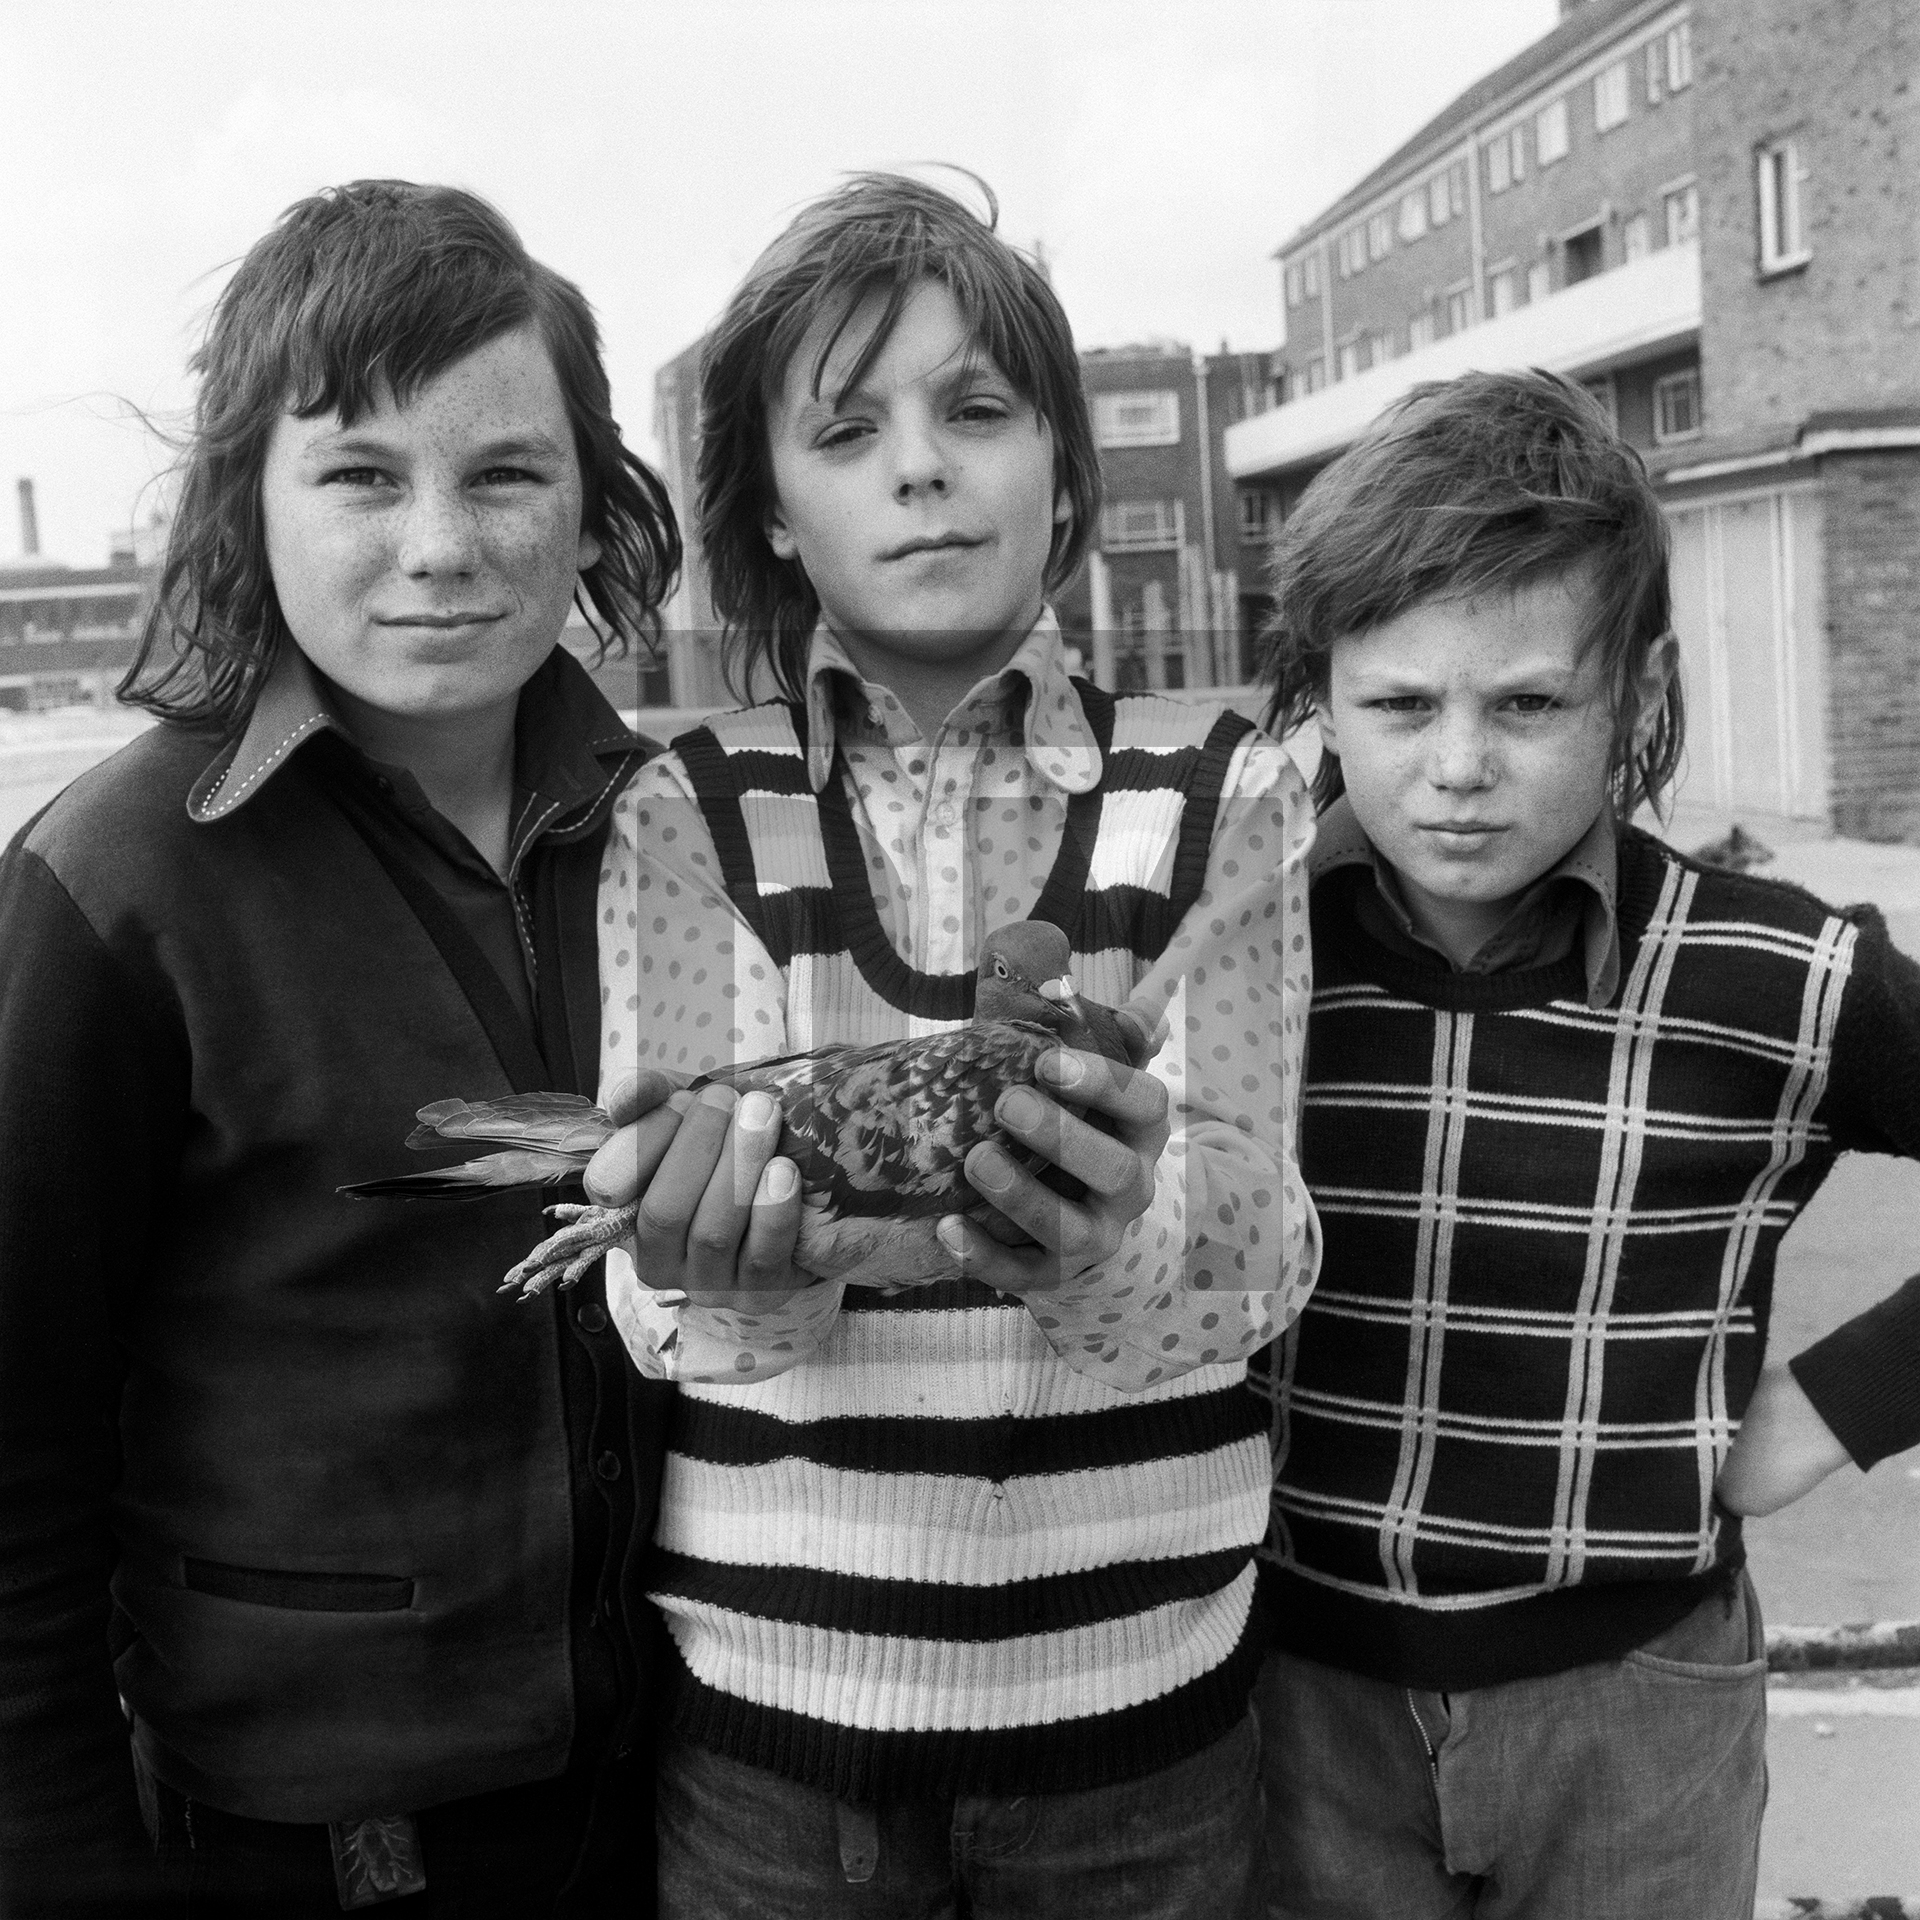 John Payne aged 11 with his pigeon Chequer and friends the White brothers: left Michael, right Kalvin. Portsmouth. Friday 26 April 1974 by Daniel Meadows